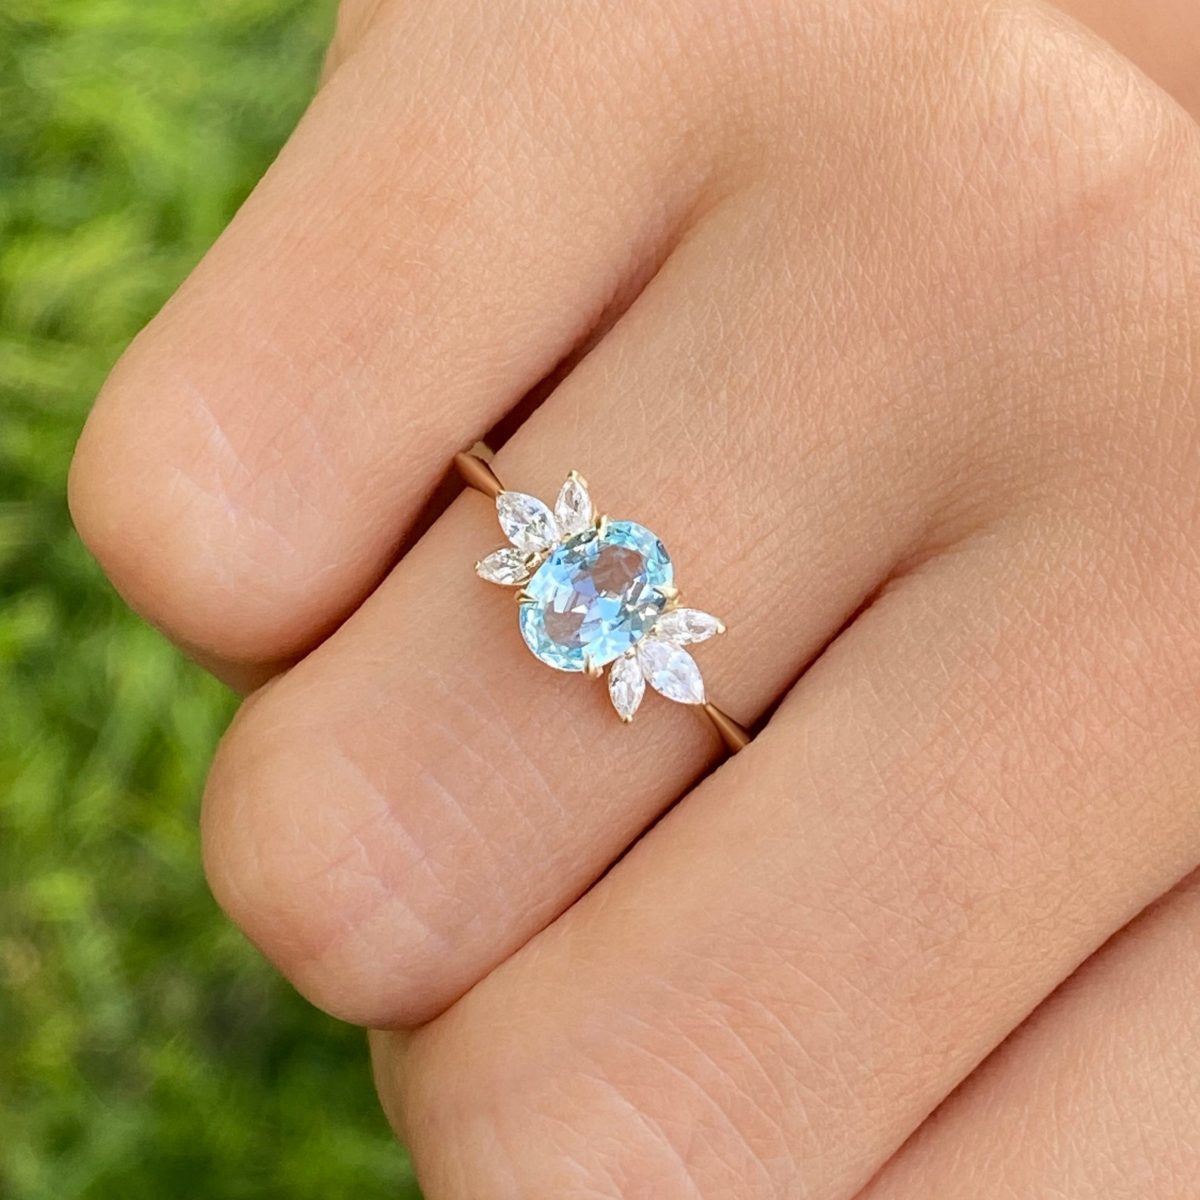 Marvelous March Birthstone Rings That Feature Aquamarine